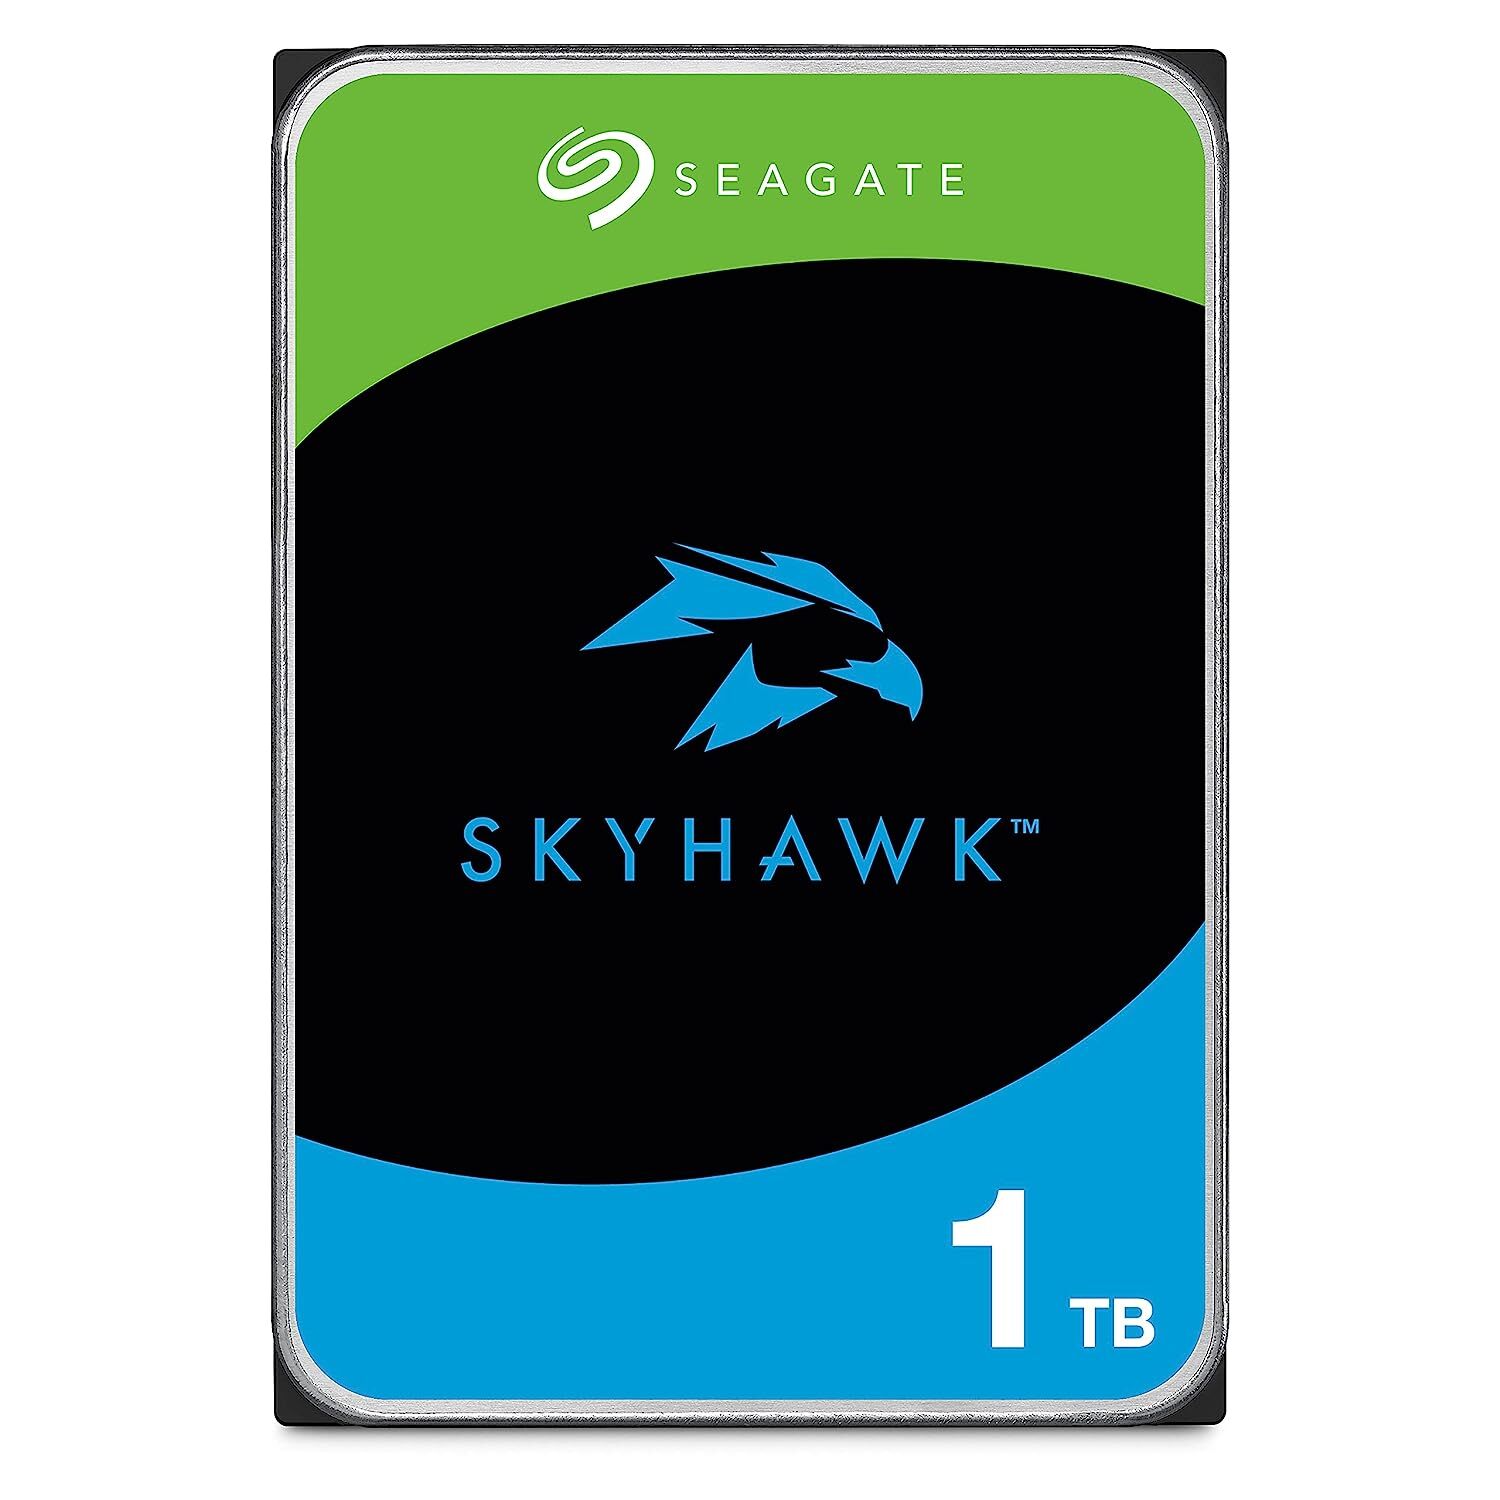 Seagate Skyhawk 1 TB Surveillance Internal Hard Drive HDD, 3.5 Inches SATA 6 Gb/s 64 MB Cache for DVR NVR Security Camera System (ST1000VX005)